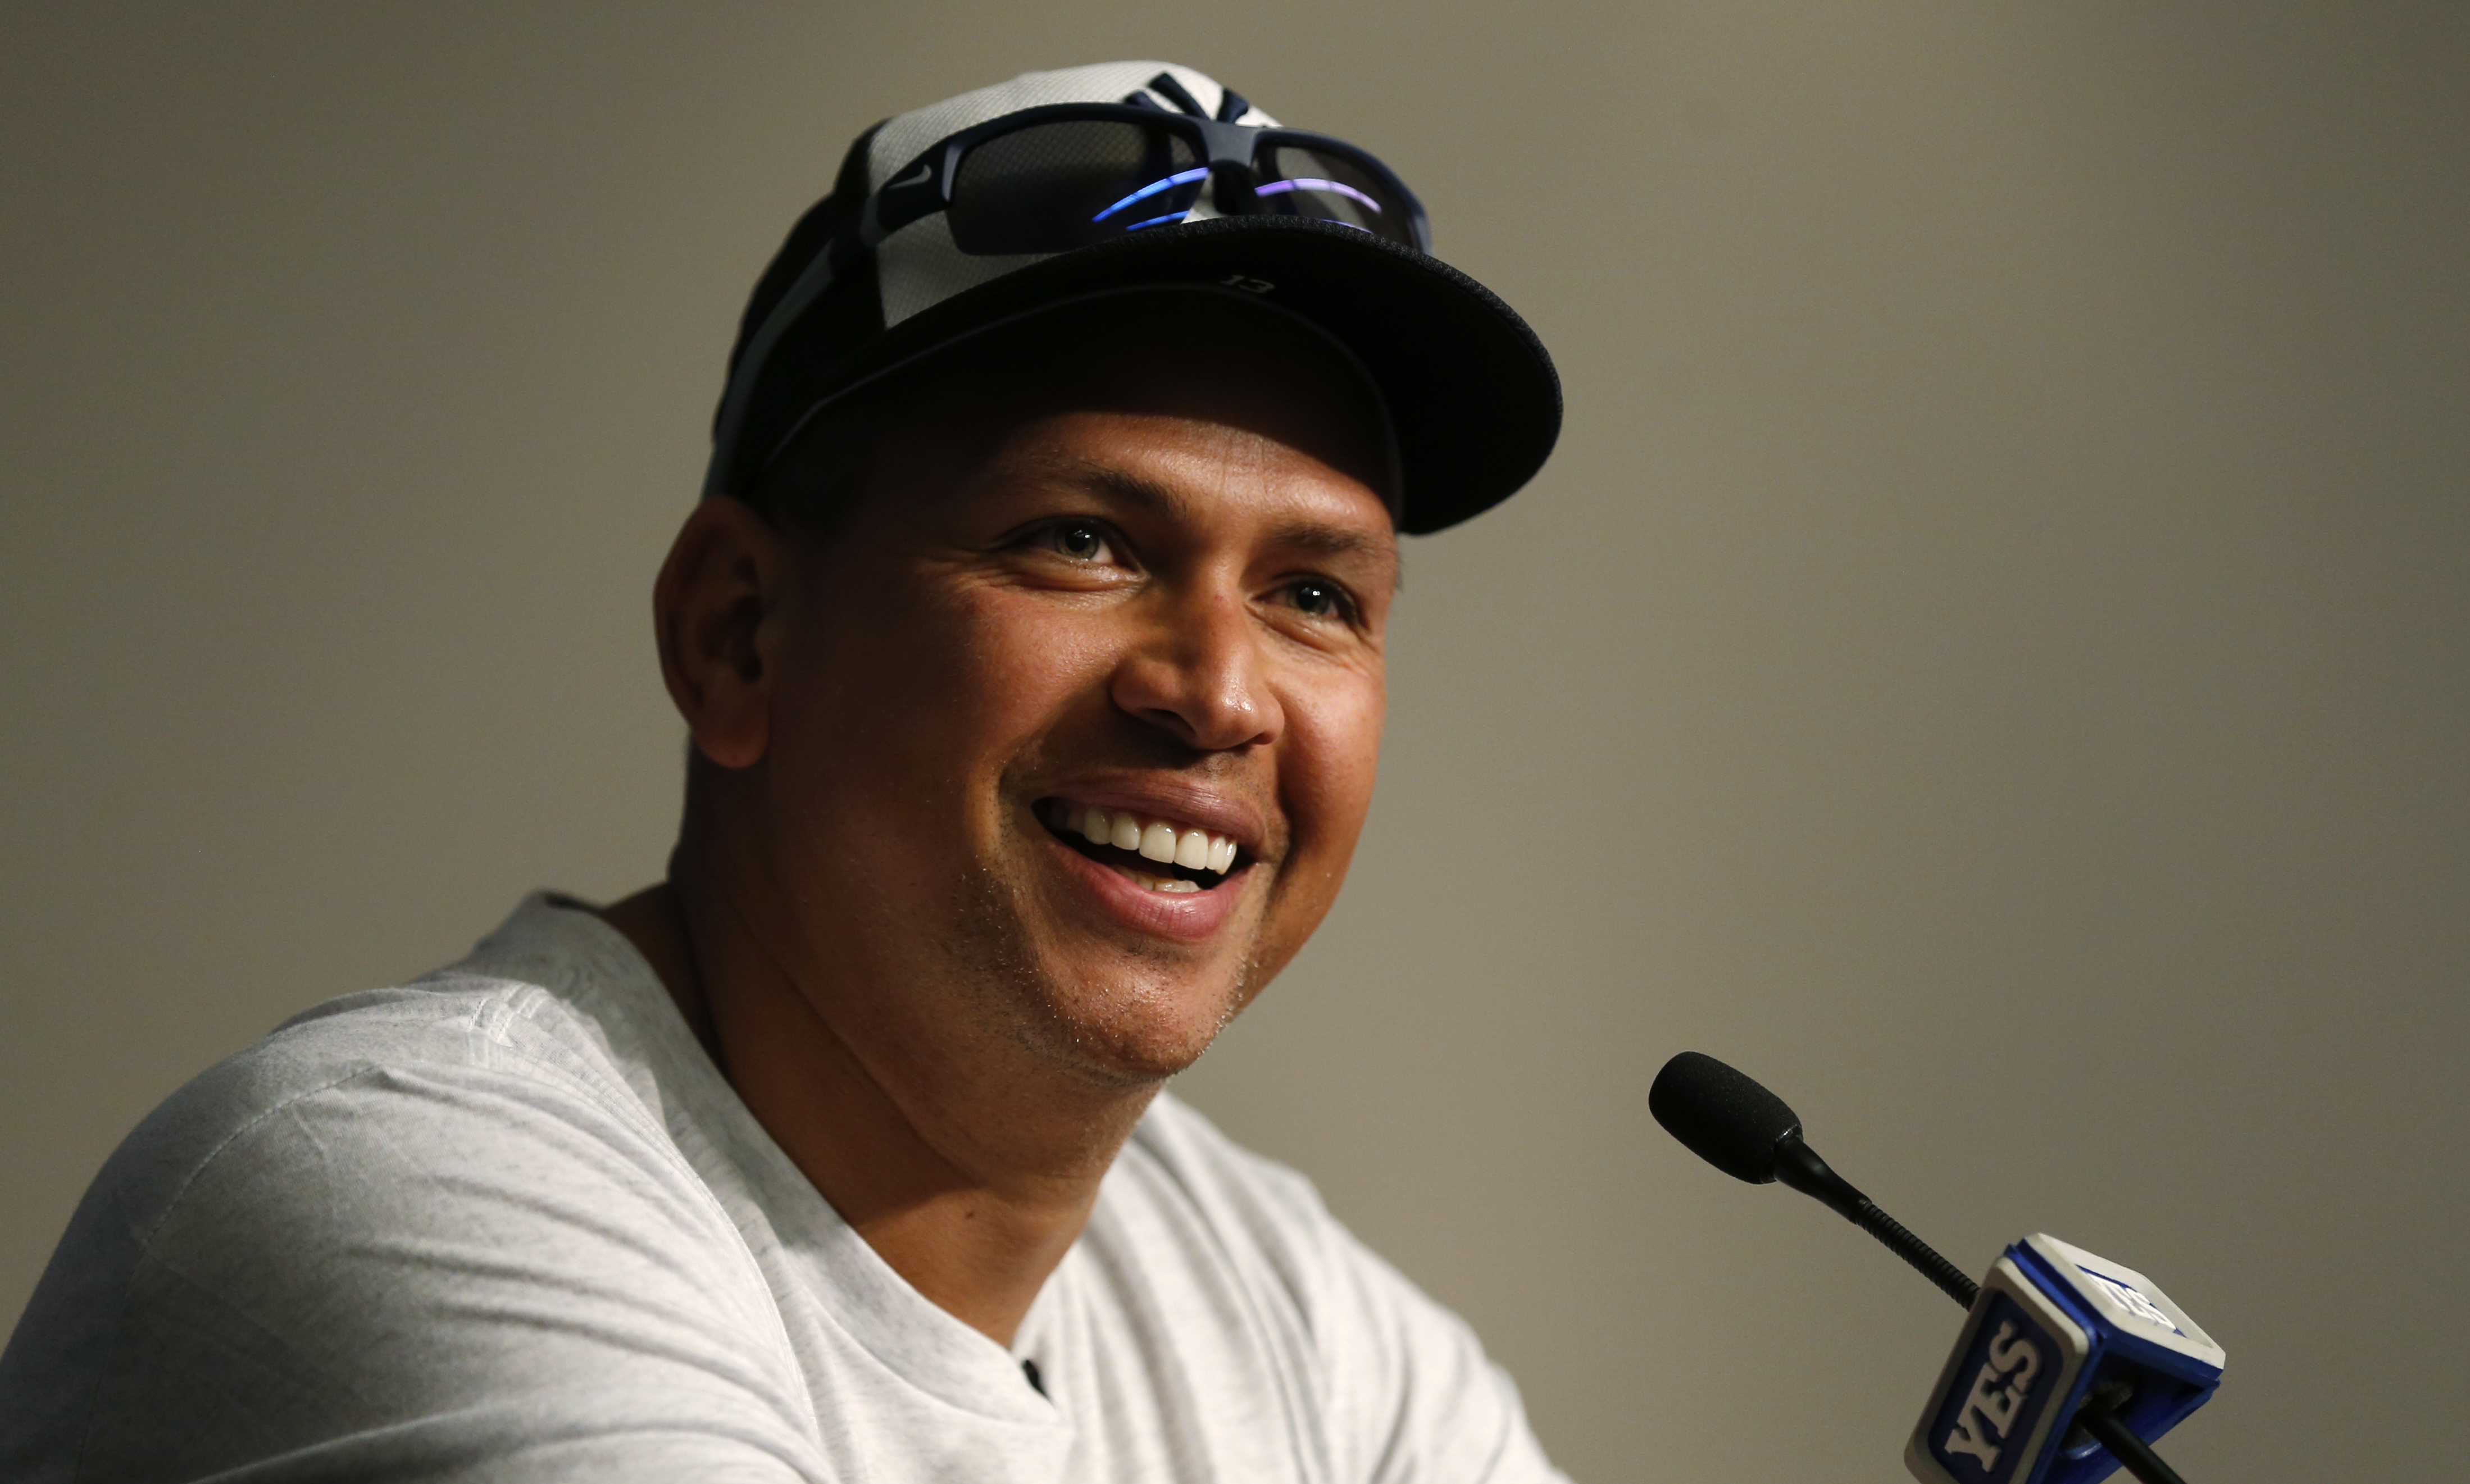 New York Yankee icon Alex Rodriguez introduces makeup for men